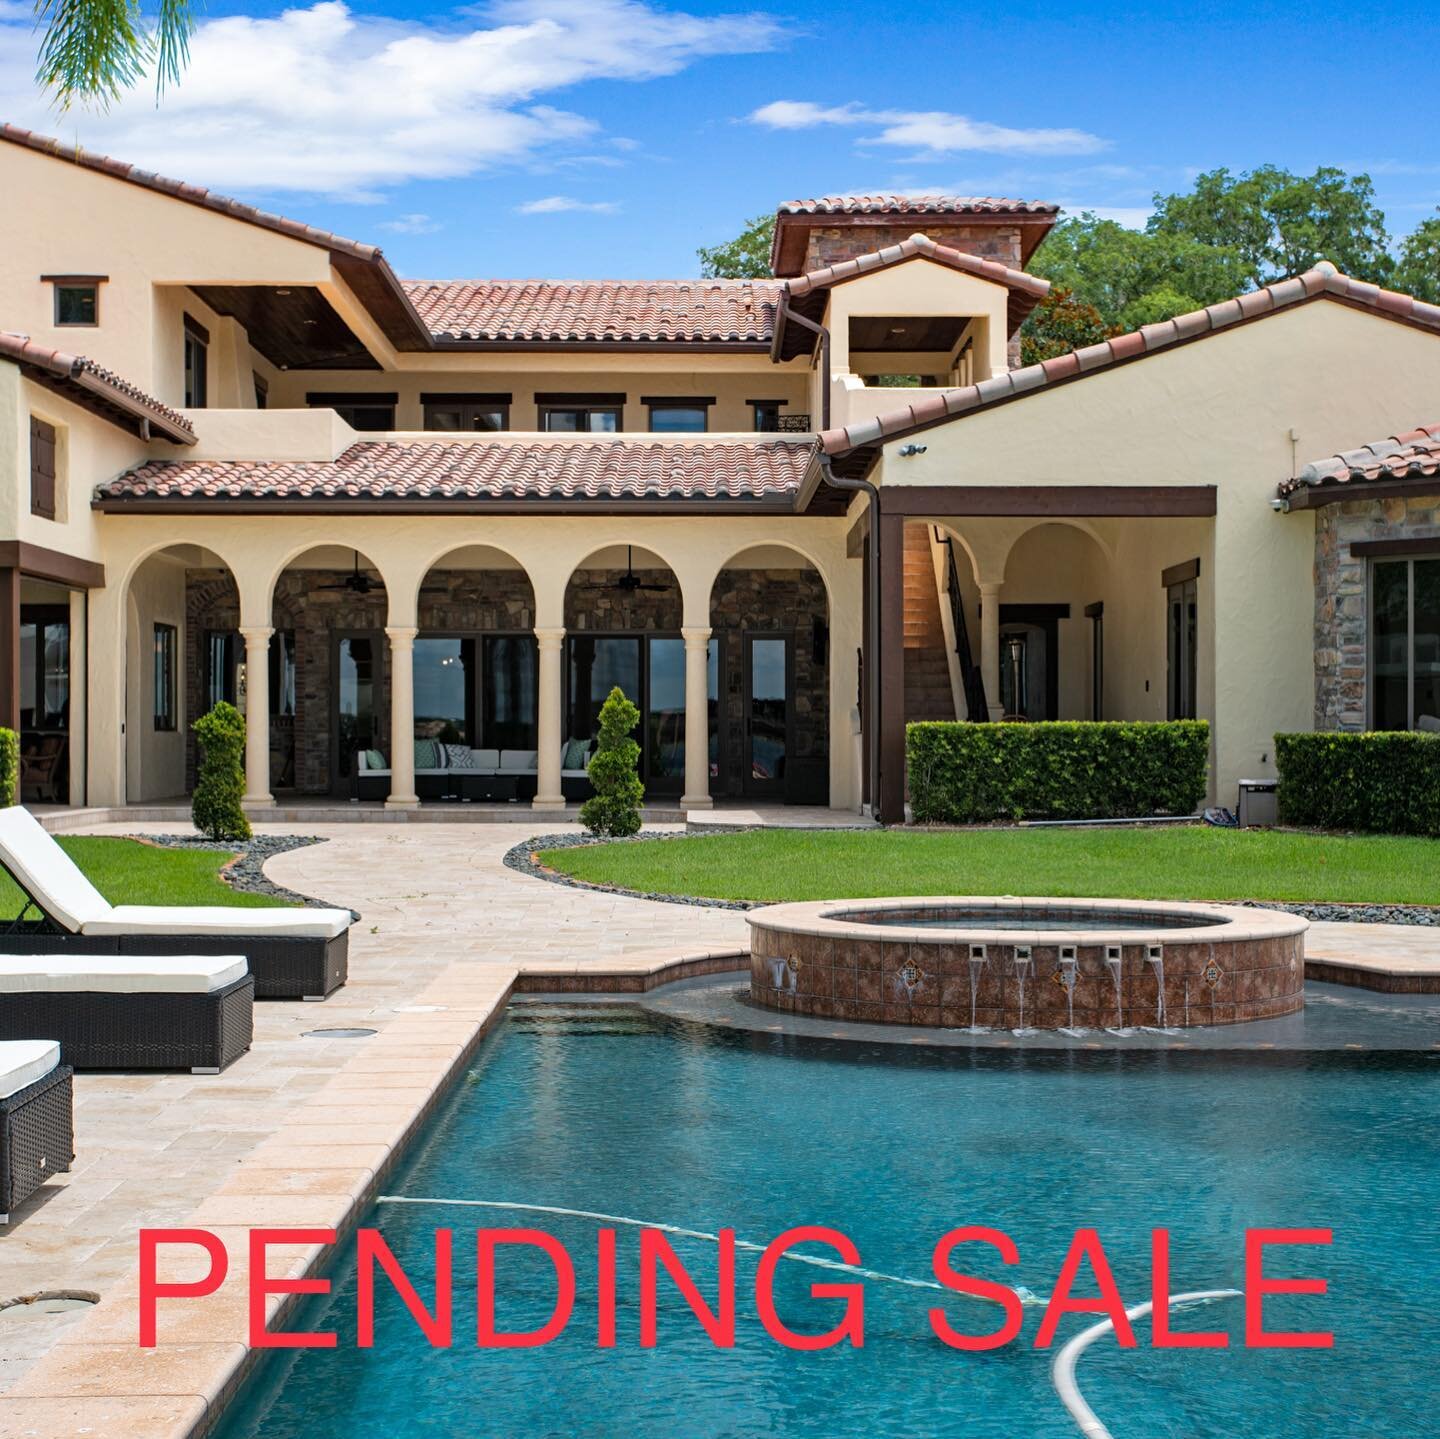 PENDING SALE

Seventeen days on market!!!! Congrats to my long-time friends and clients on the pending sale of 9702 Wild Oak Drive! After testing the market for a few years, my clients brought us on to give this estate a fresh take on things. Faux-pa